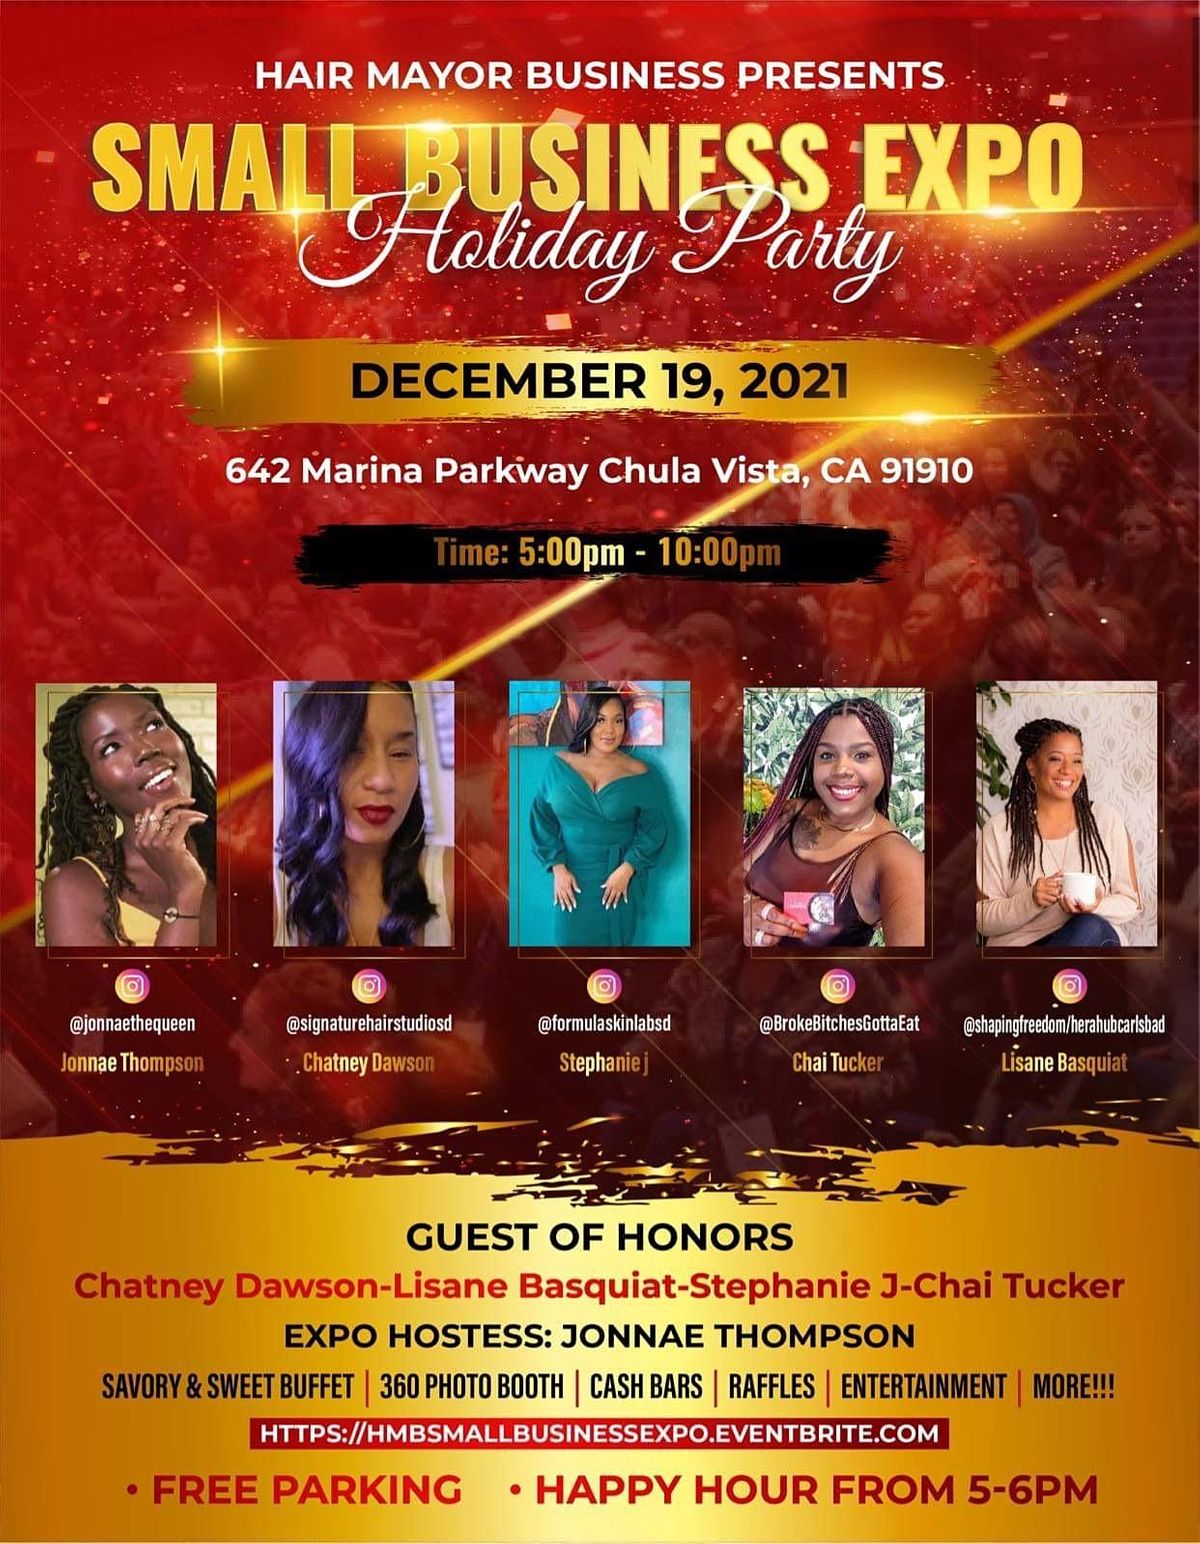 Small Business Expo - Holiday Party